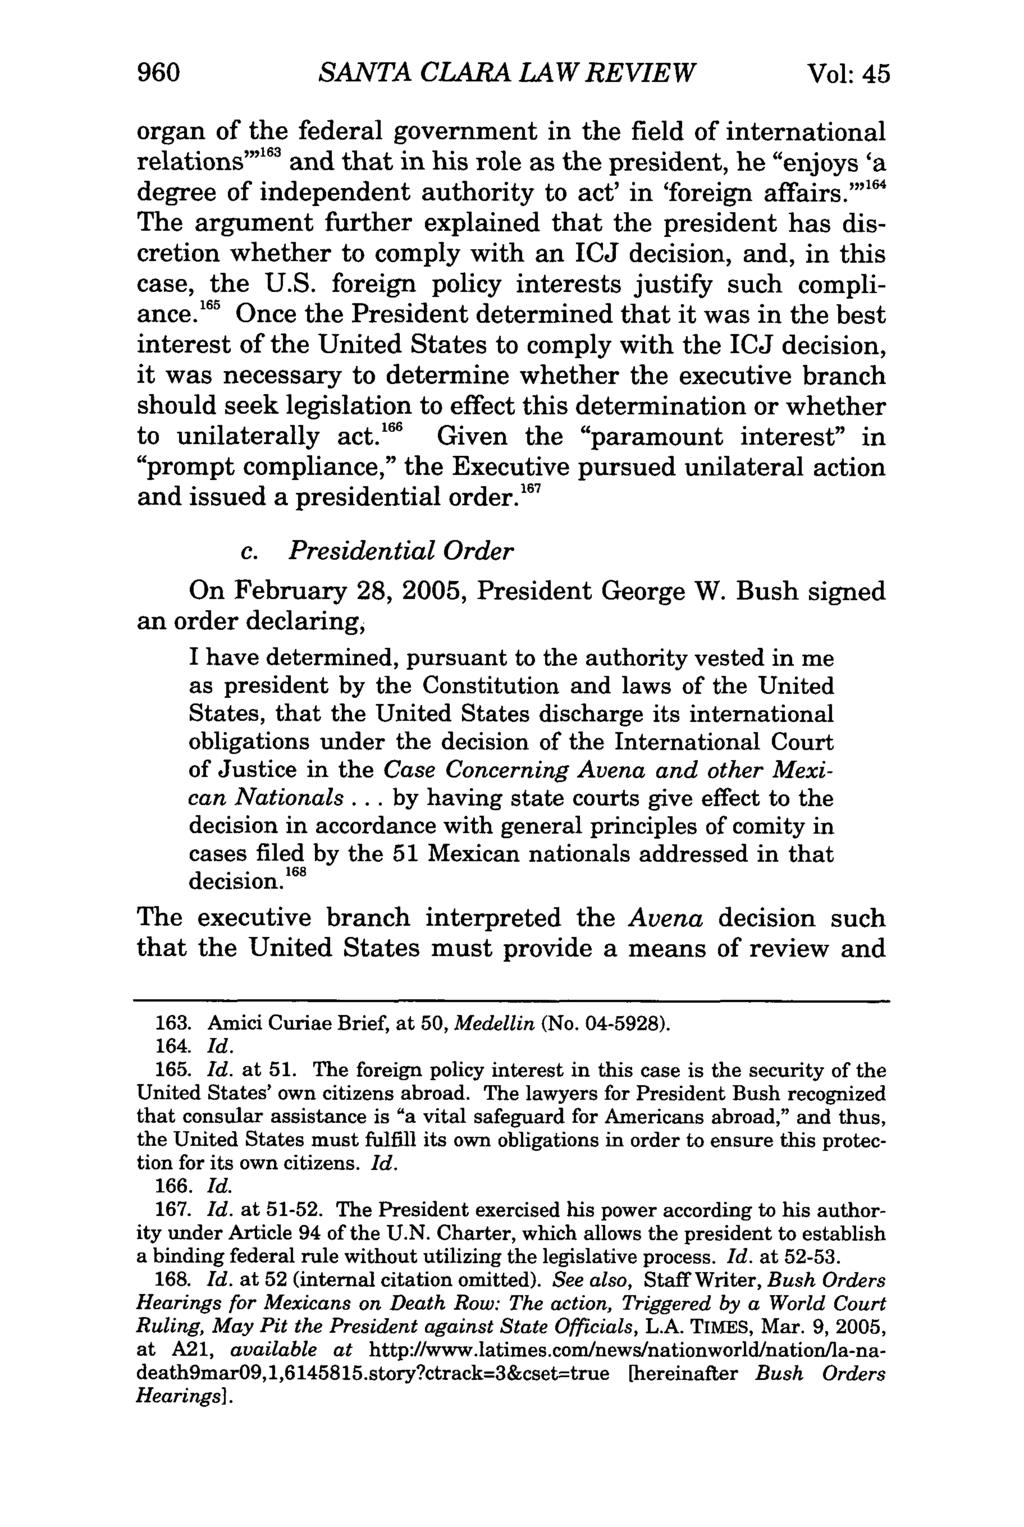 960 SANTA CLARA LAW REVIEW Vol: 45 organ of the federal government in the field of international relations"" 6 and that in his role as the president, he "enjoys 'a degree of independent authority to